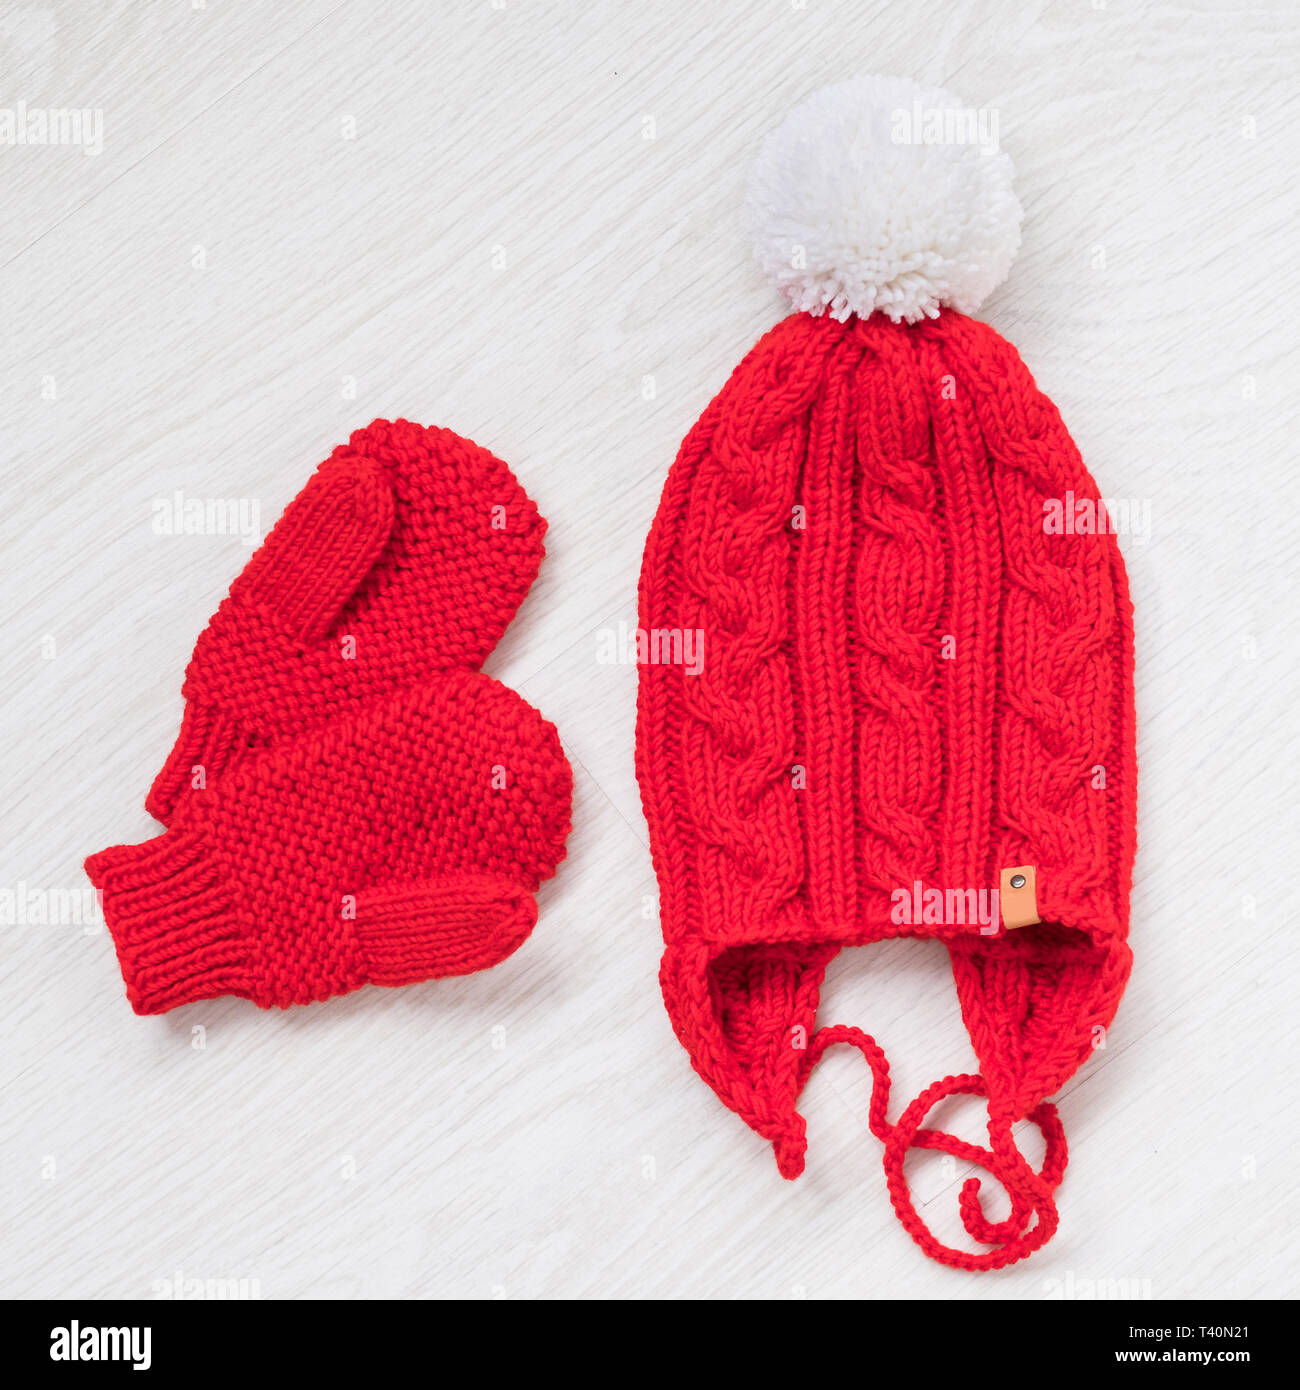 cute cozy knitted children winter set Stock Photo